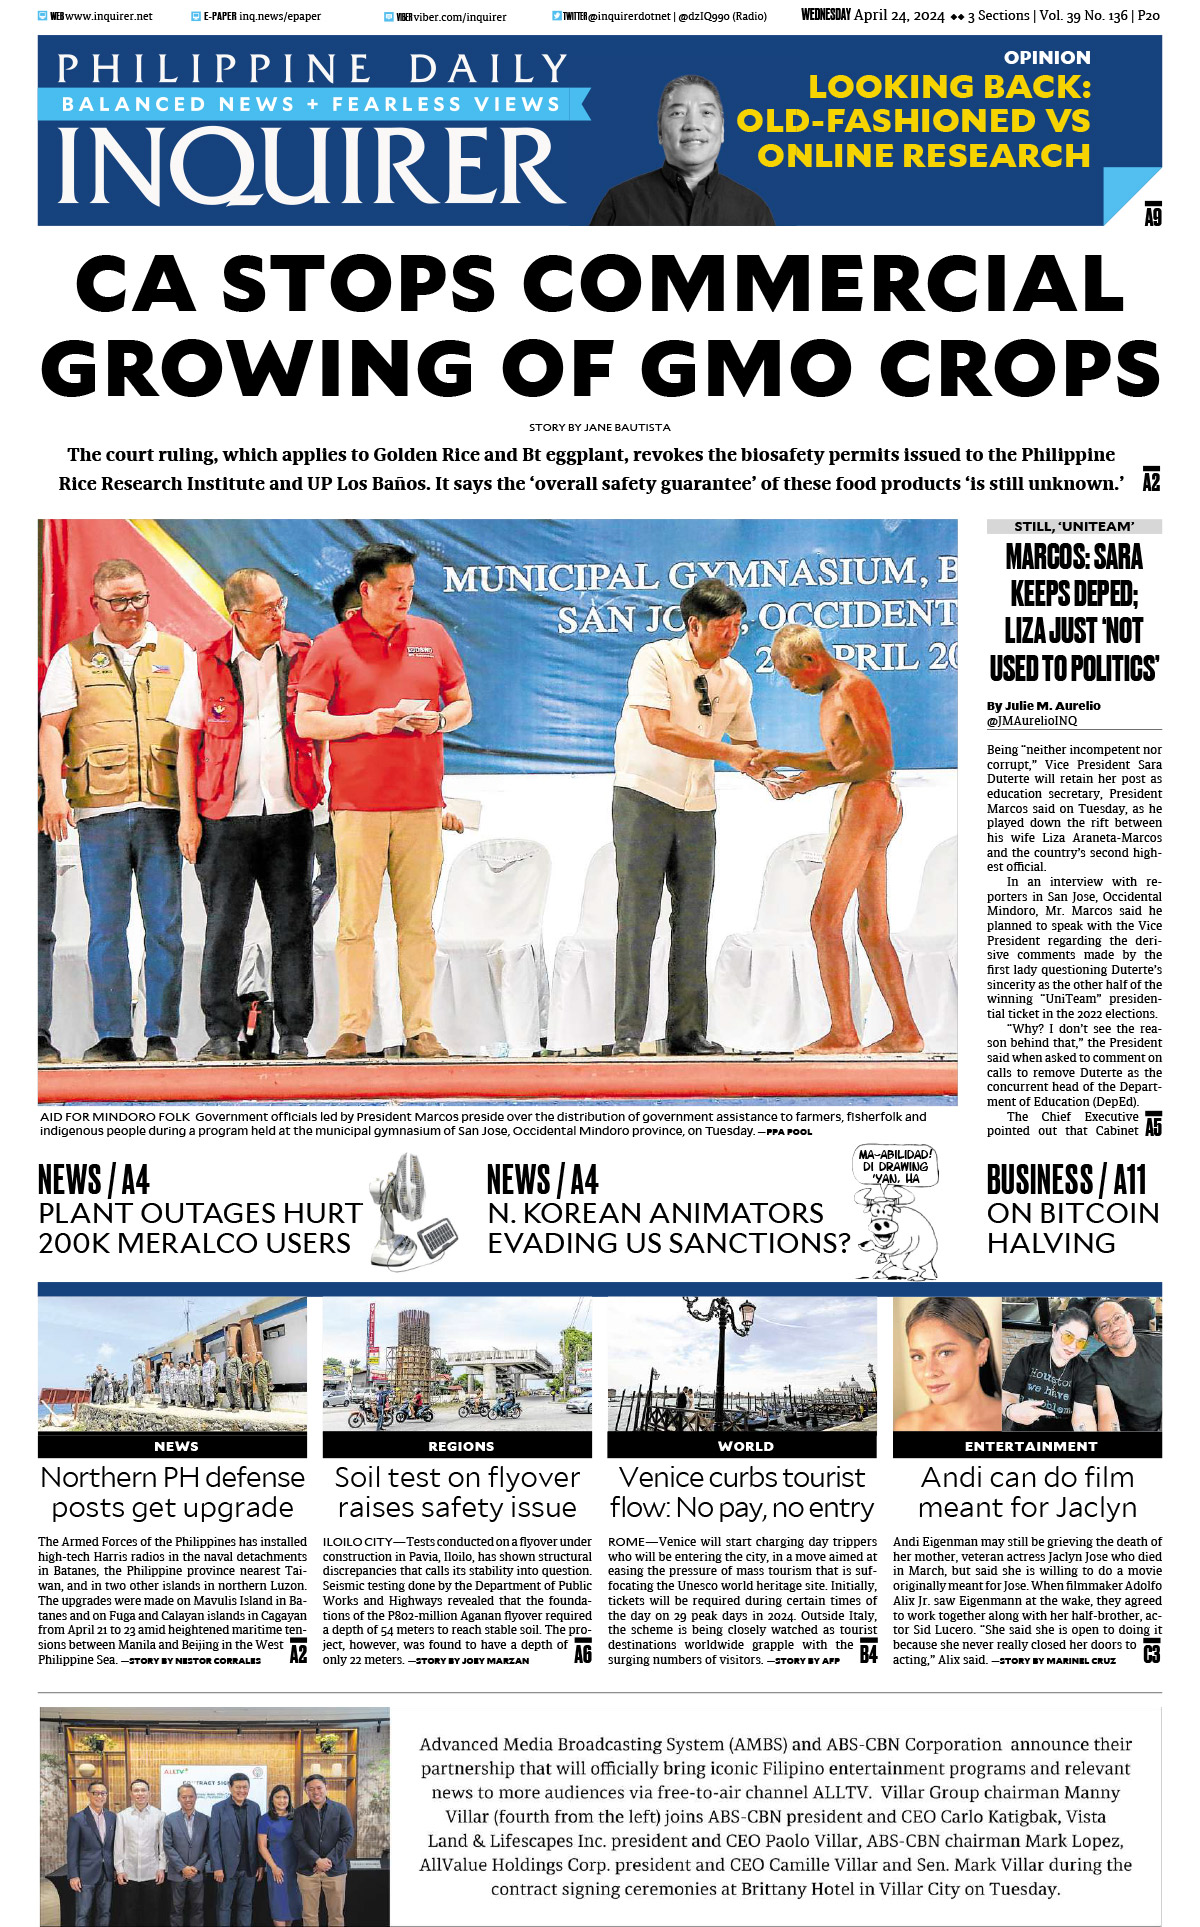 Today’s Paper: April 24, 2024